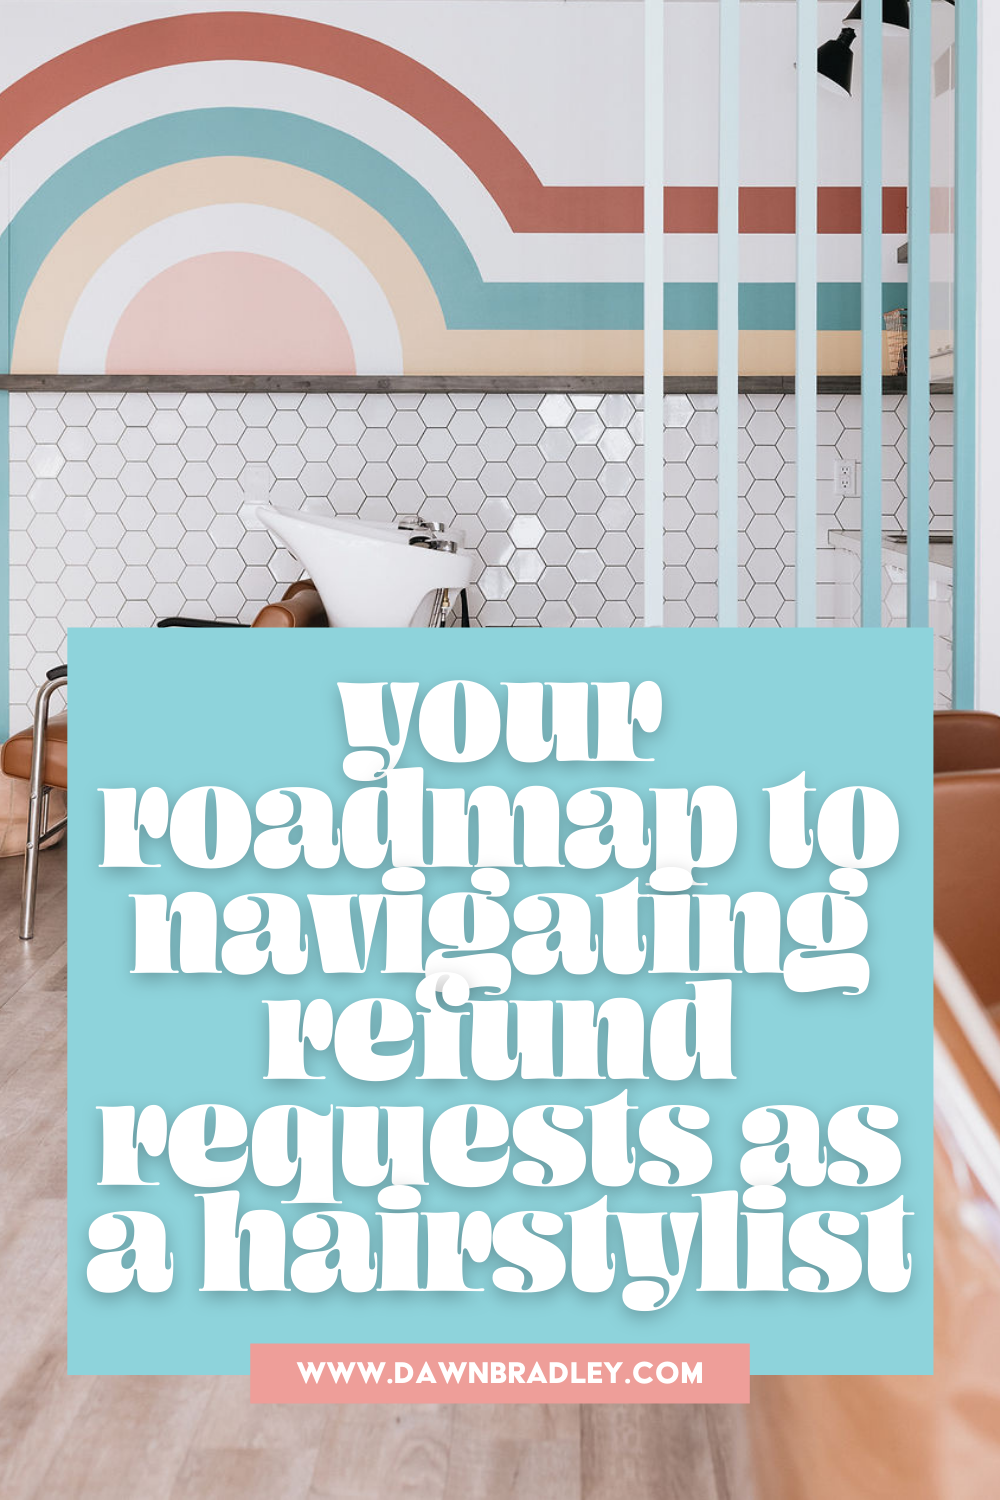 Text overlay reads "your roadmap to navigating refund requests as a hairstylist" in front of brown salon chairs and sinks. The wall in the back has been painted with a colorful rainbow